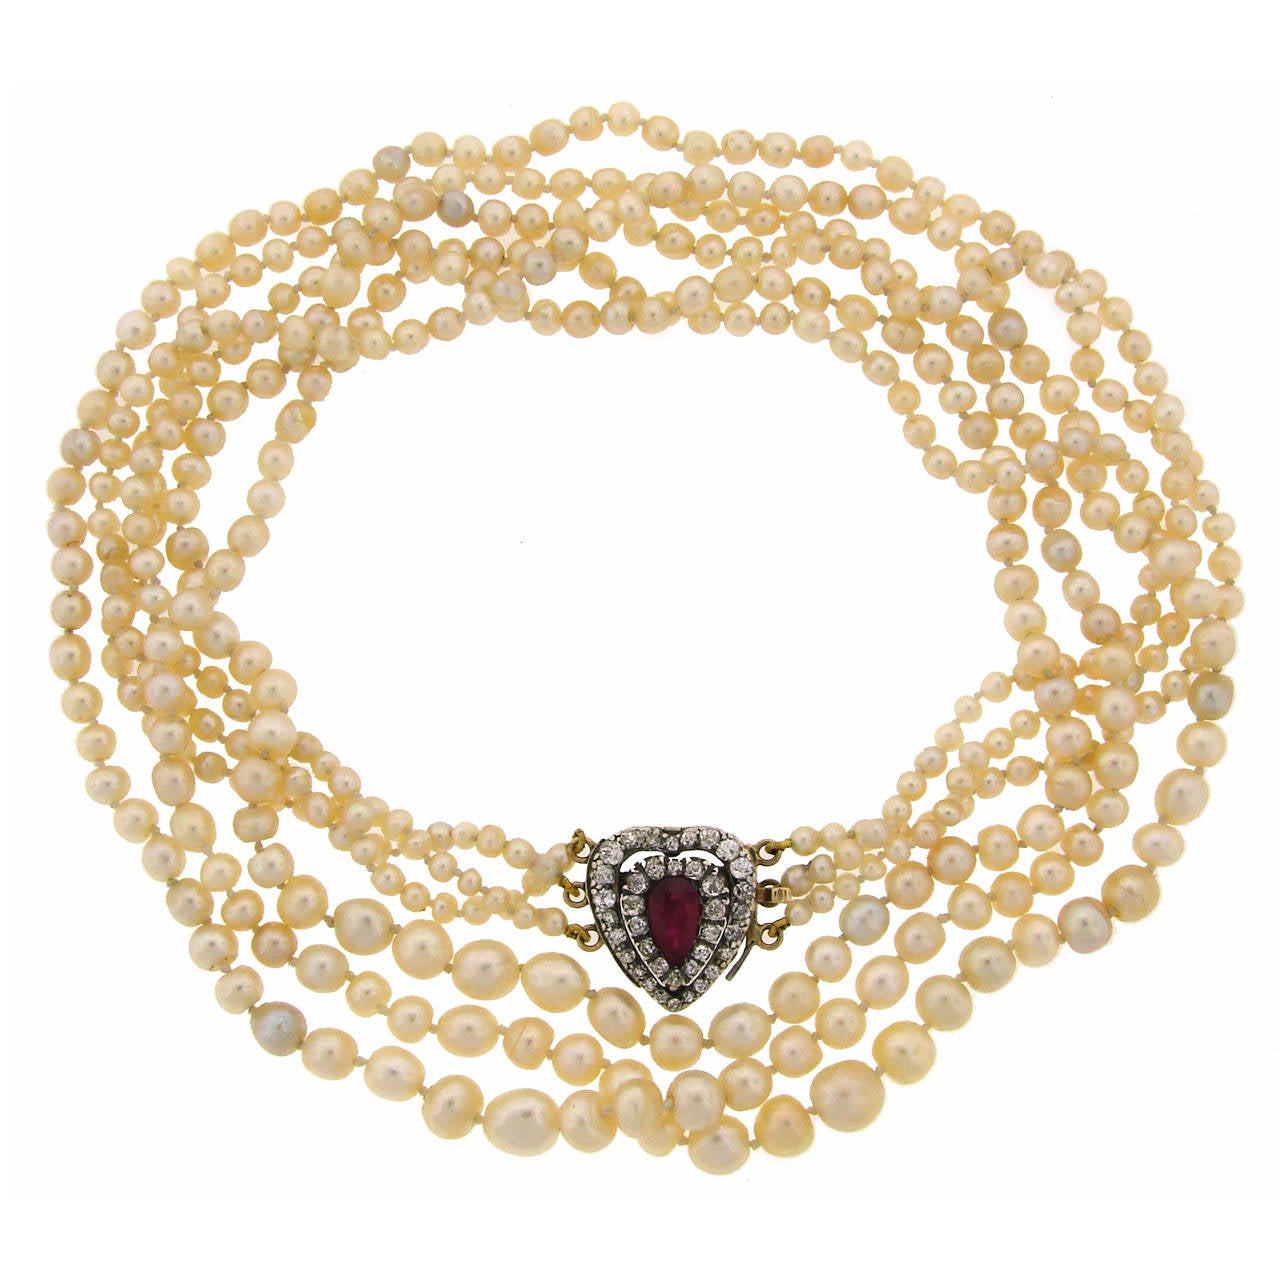 Victorian natural pearl necklace with a gorgeous clasp. Features three strands of natural pearls culminating with a diamond clasp set in platinum and yellow gold. The pearls come with a certificate from Gemological Certification Services London UK